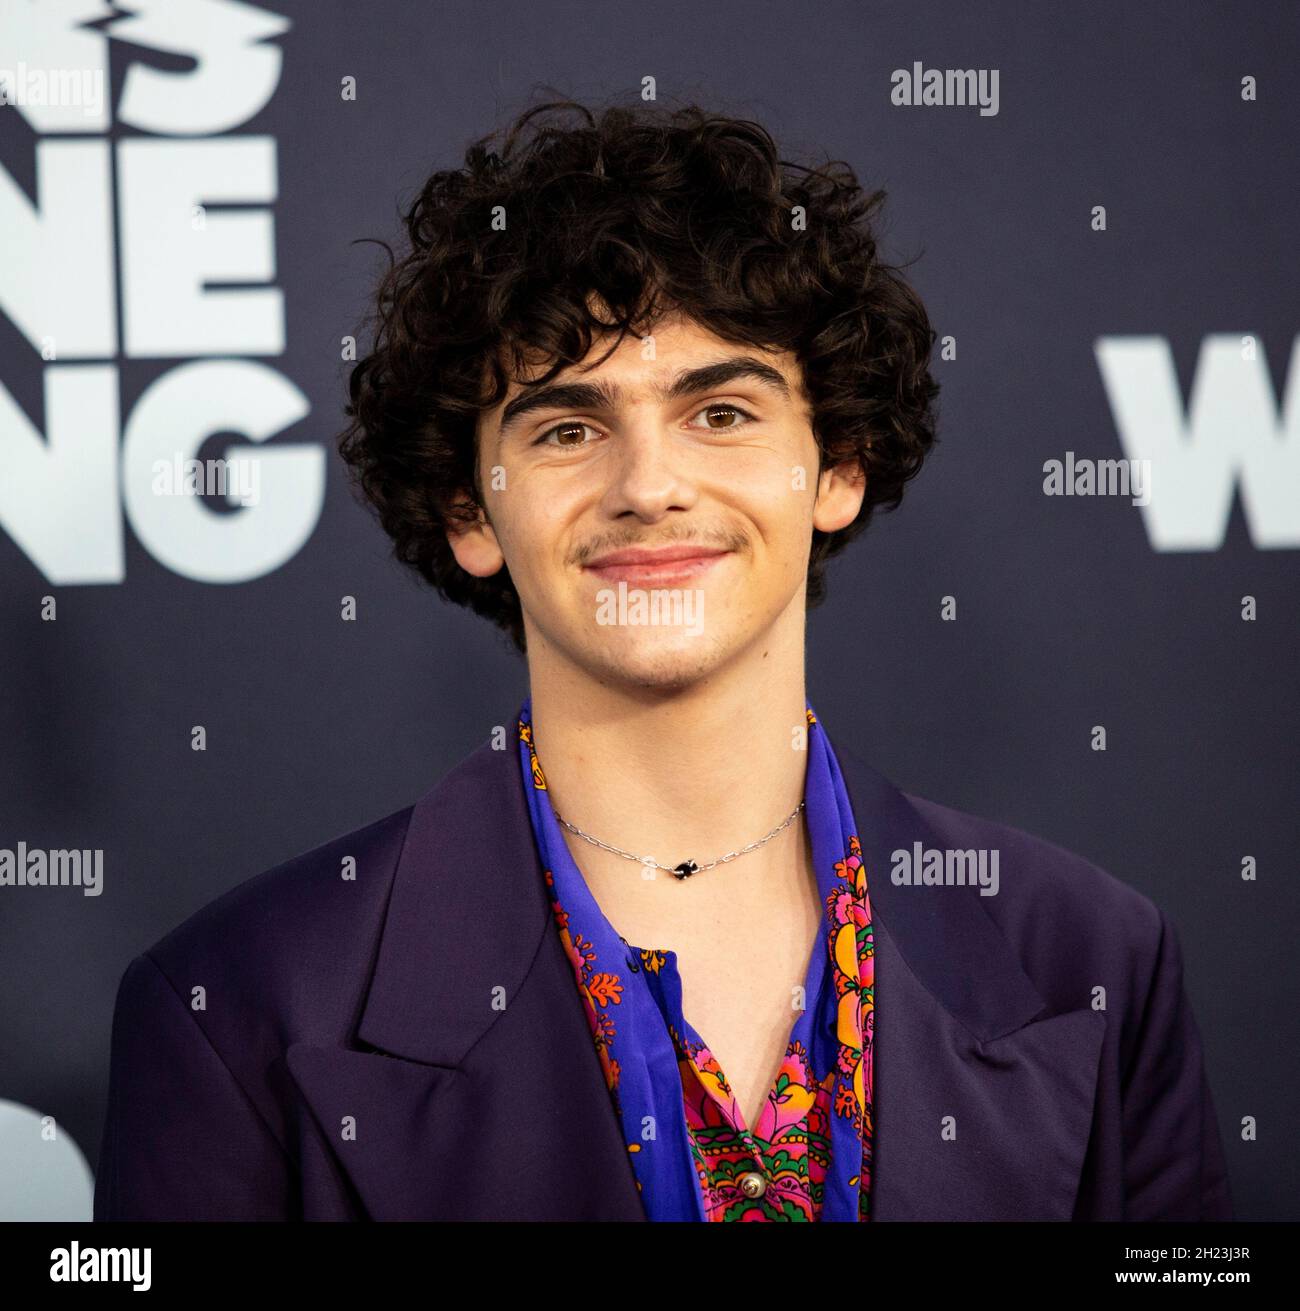 Jack Dylan Grazer attends the premiere of the film "Ron's Gone Wrong" in  Los Angeles, California, U.S., October 19, 2021. REUTERS/Aude Guerrucci  Stock Photo - Alamy